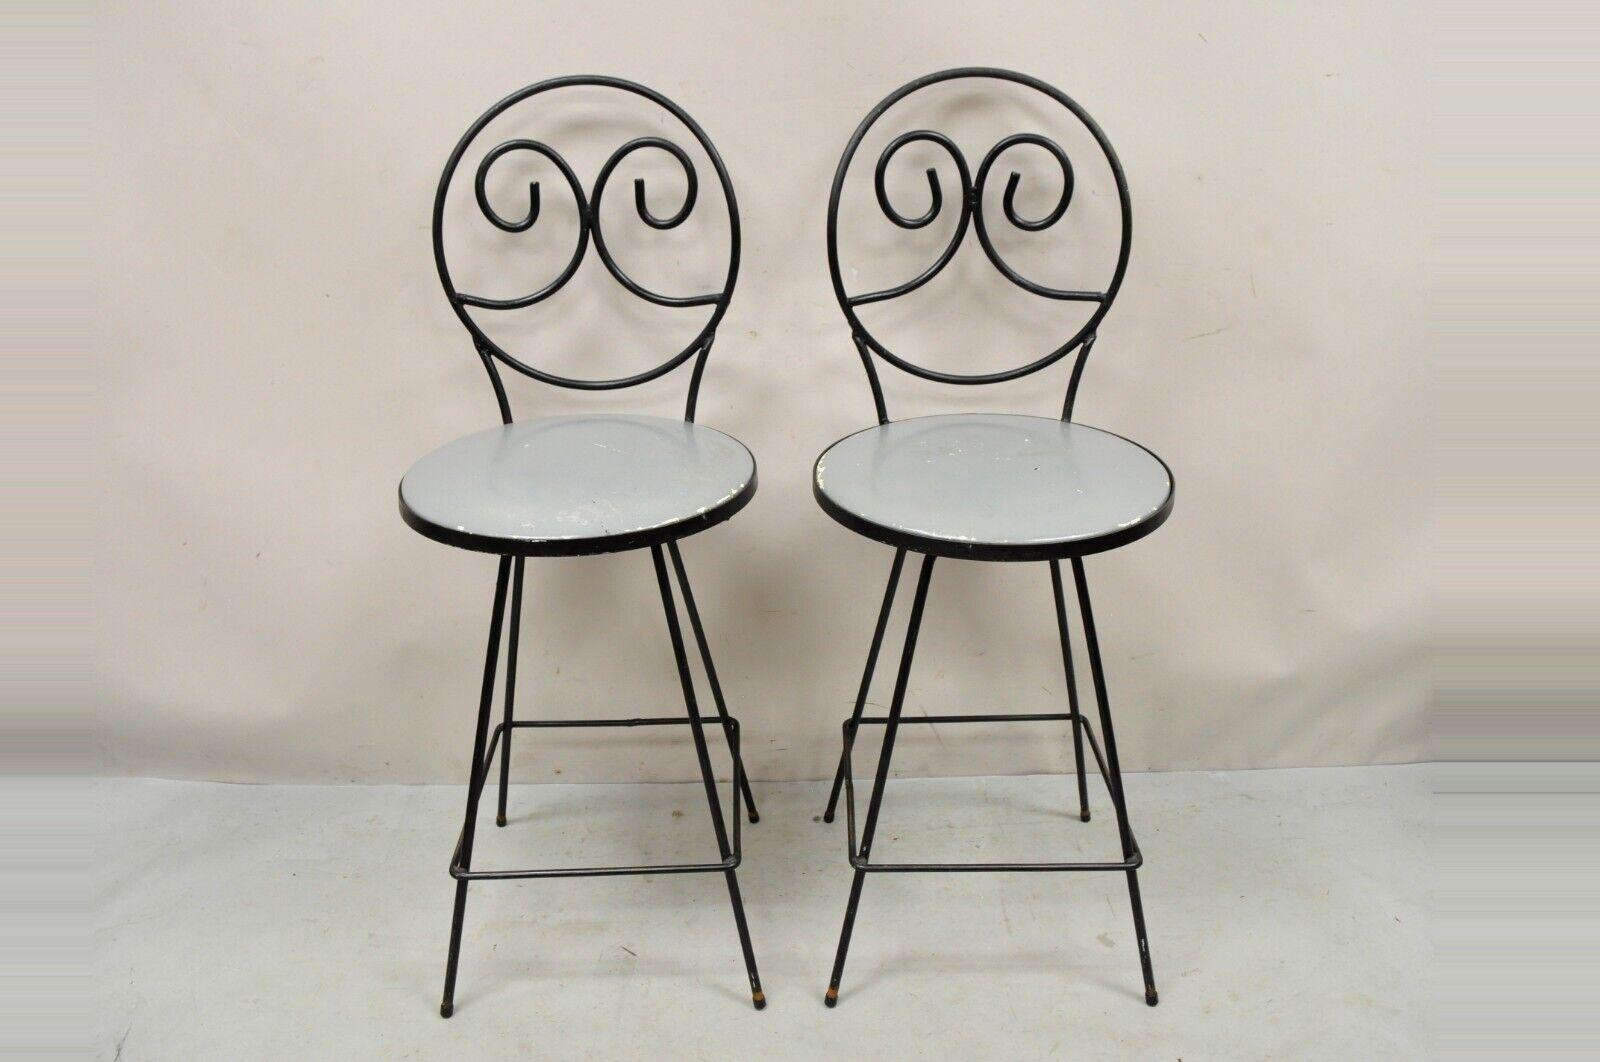 Mid-Century Modern swivel seat Arthur Umanoff style wrought iron stools - a pair. Item features swivel seats, heavy wrought iron frames, square footrests, round backs with scroll design, quality American craftsmanship, great style and form. Circa